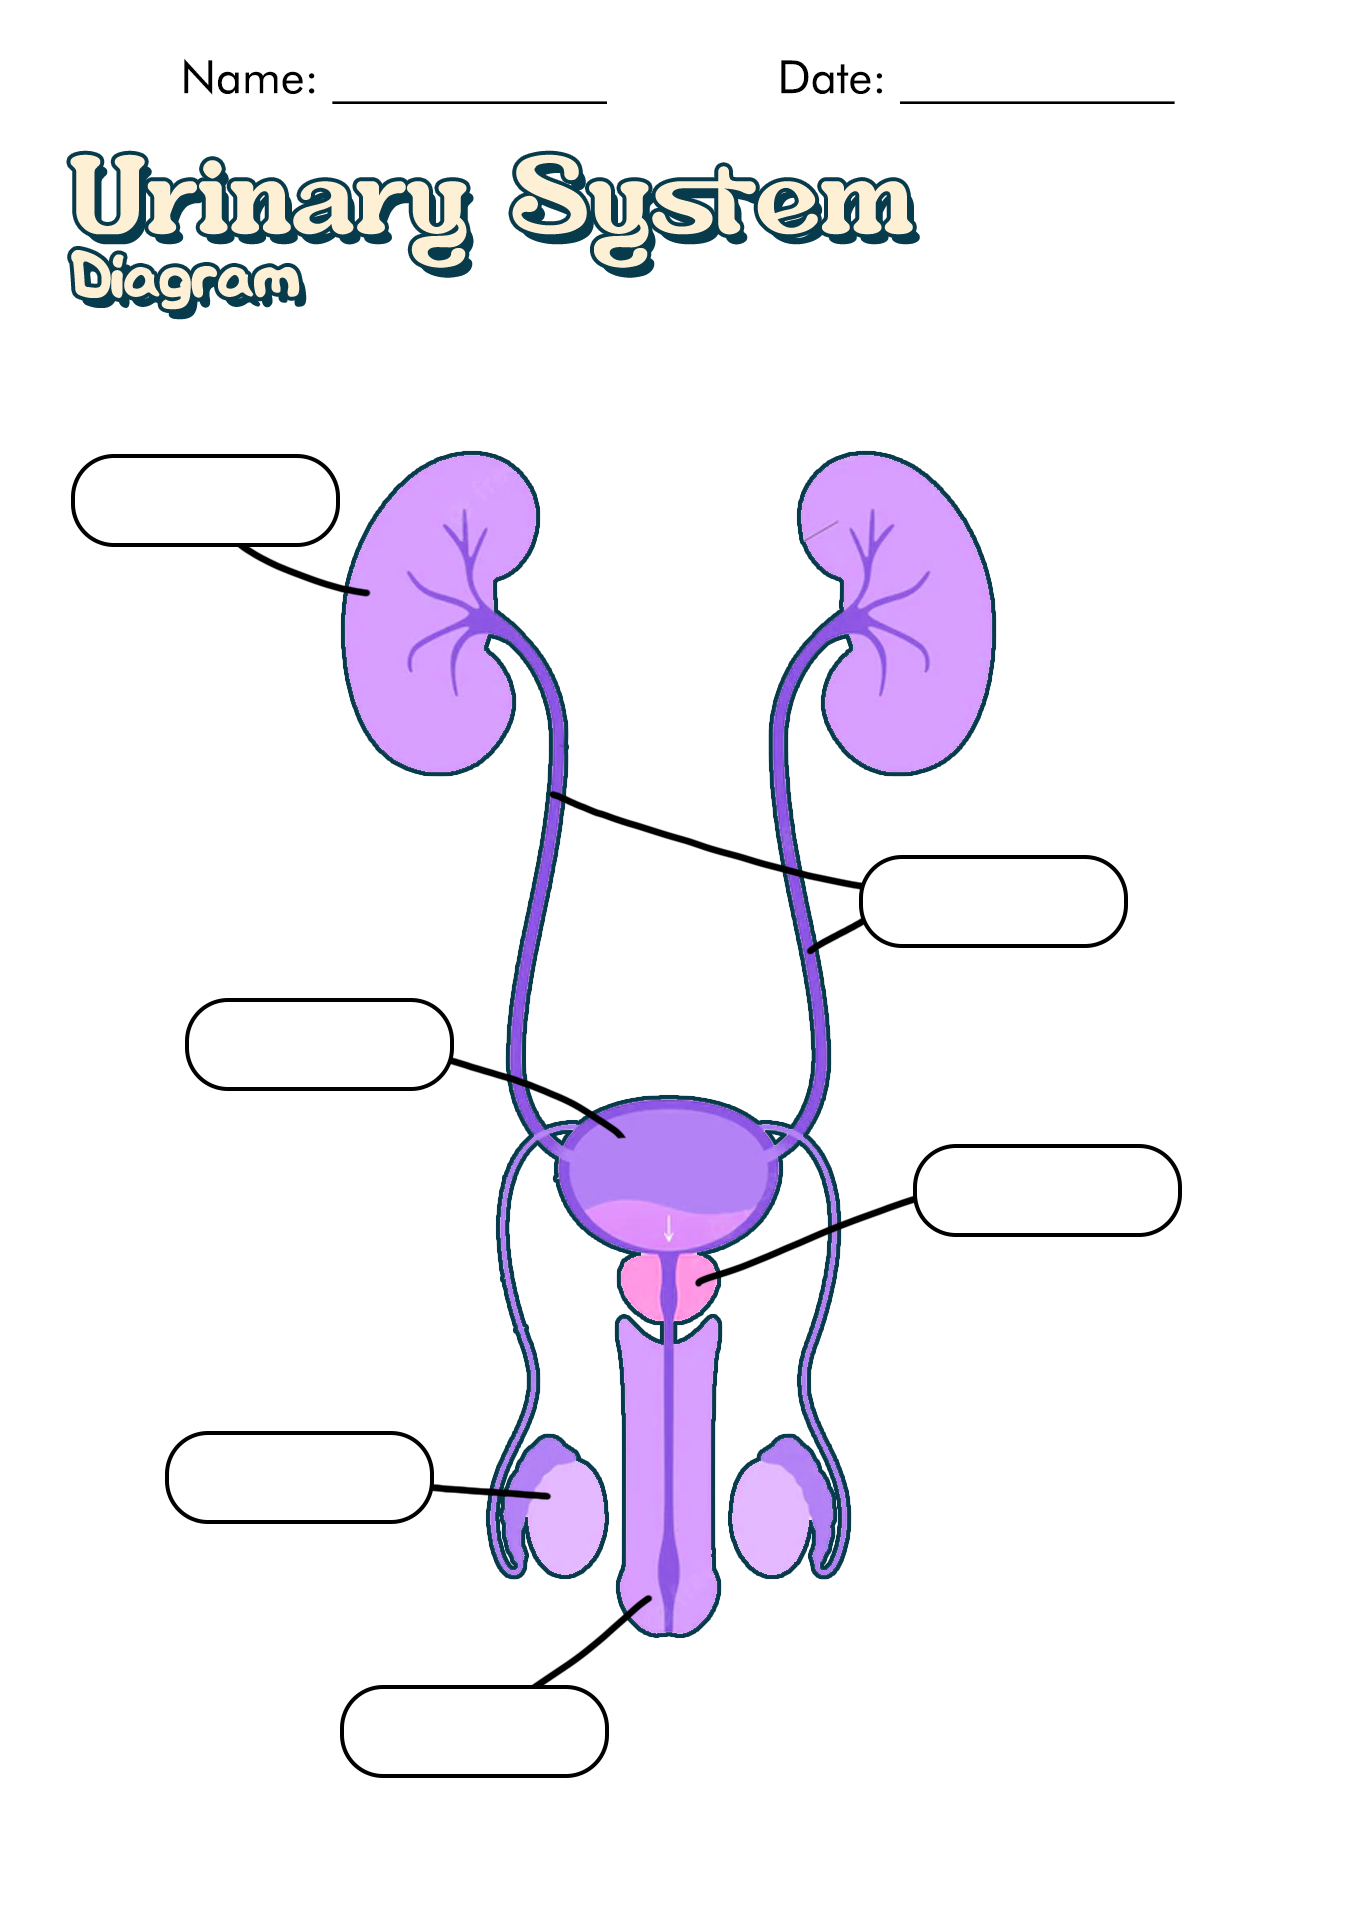 Urinary System Diagram Unlabeled Image